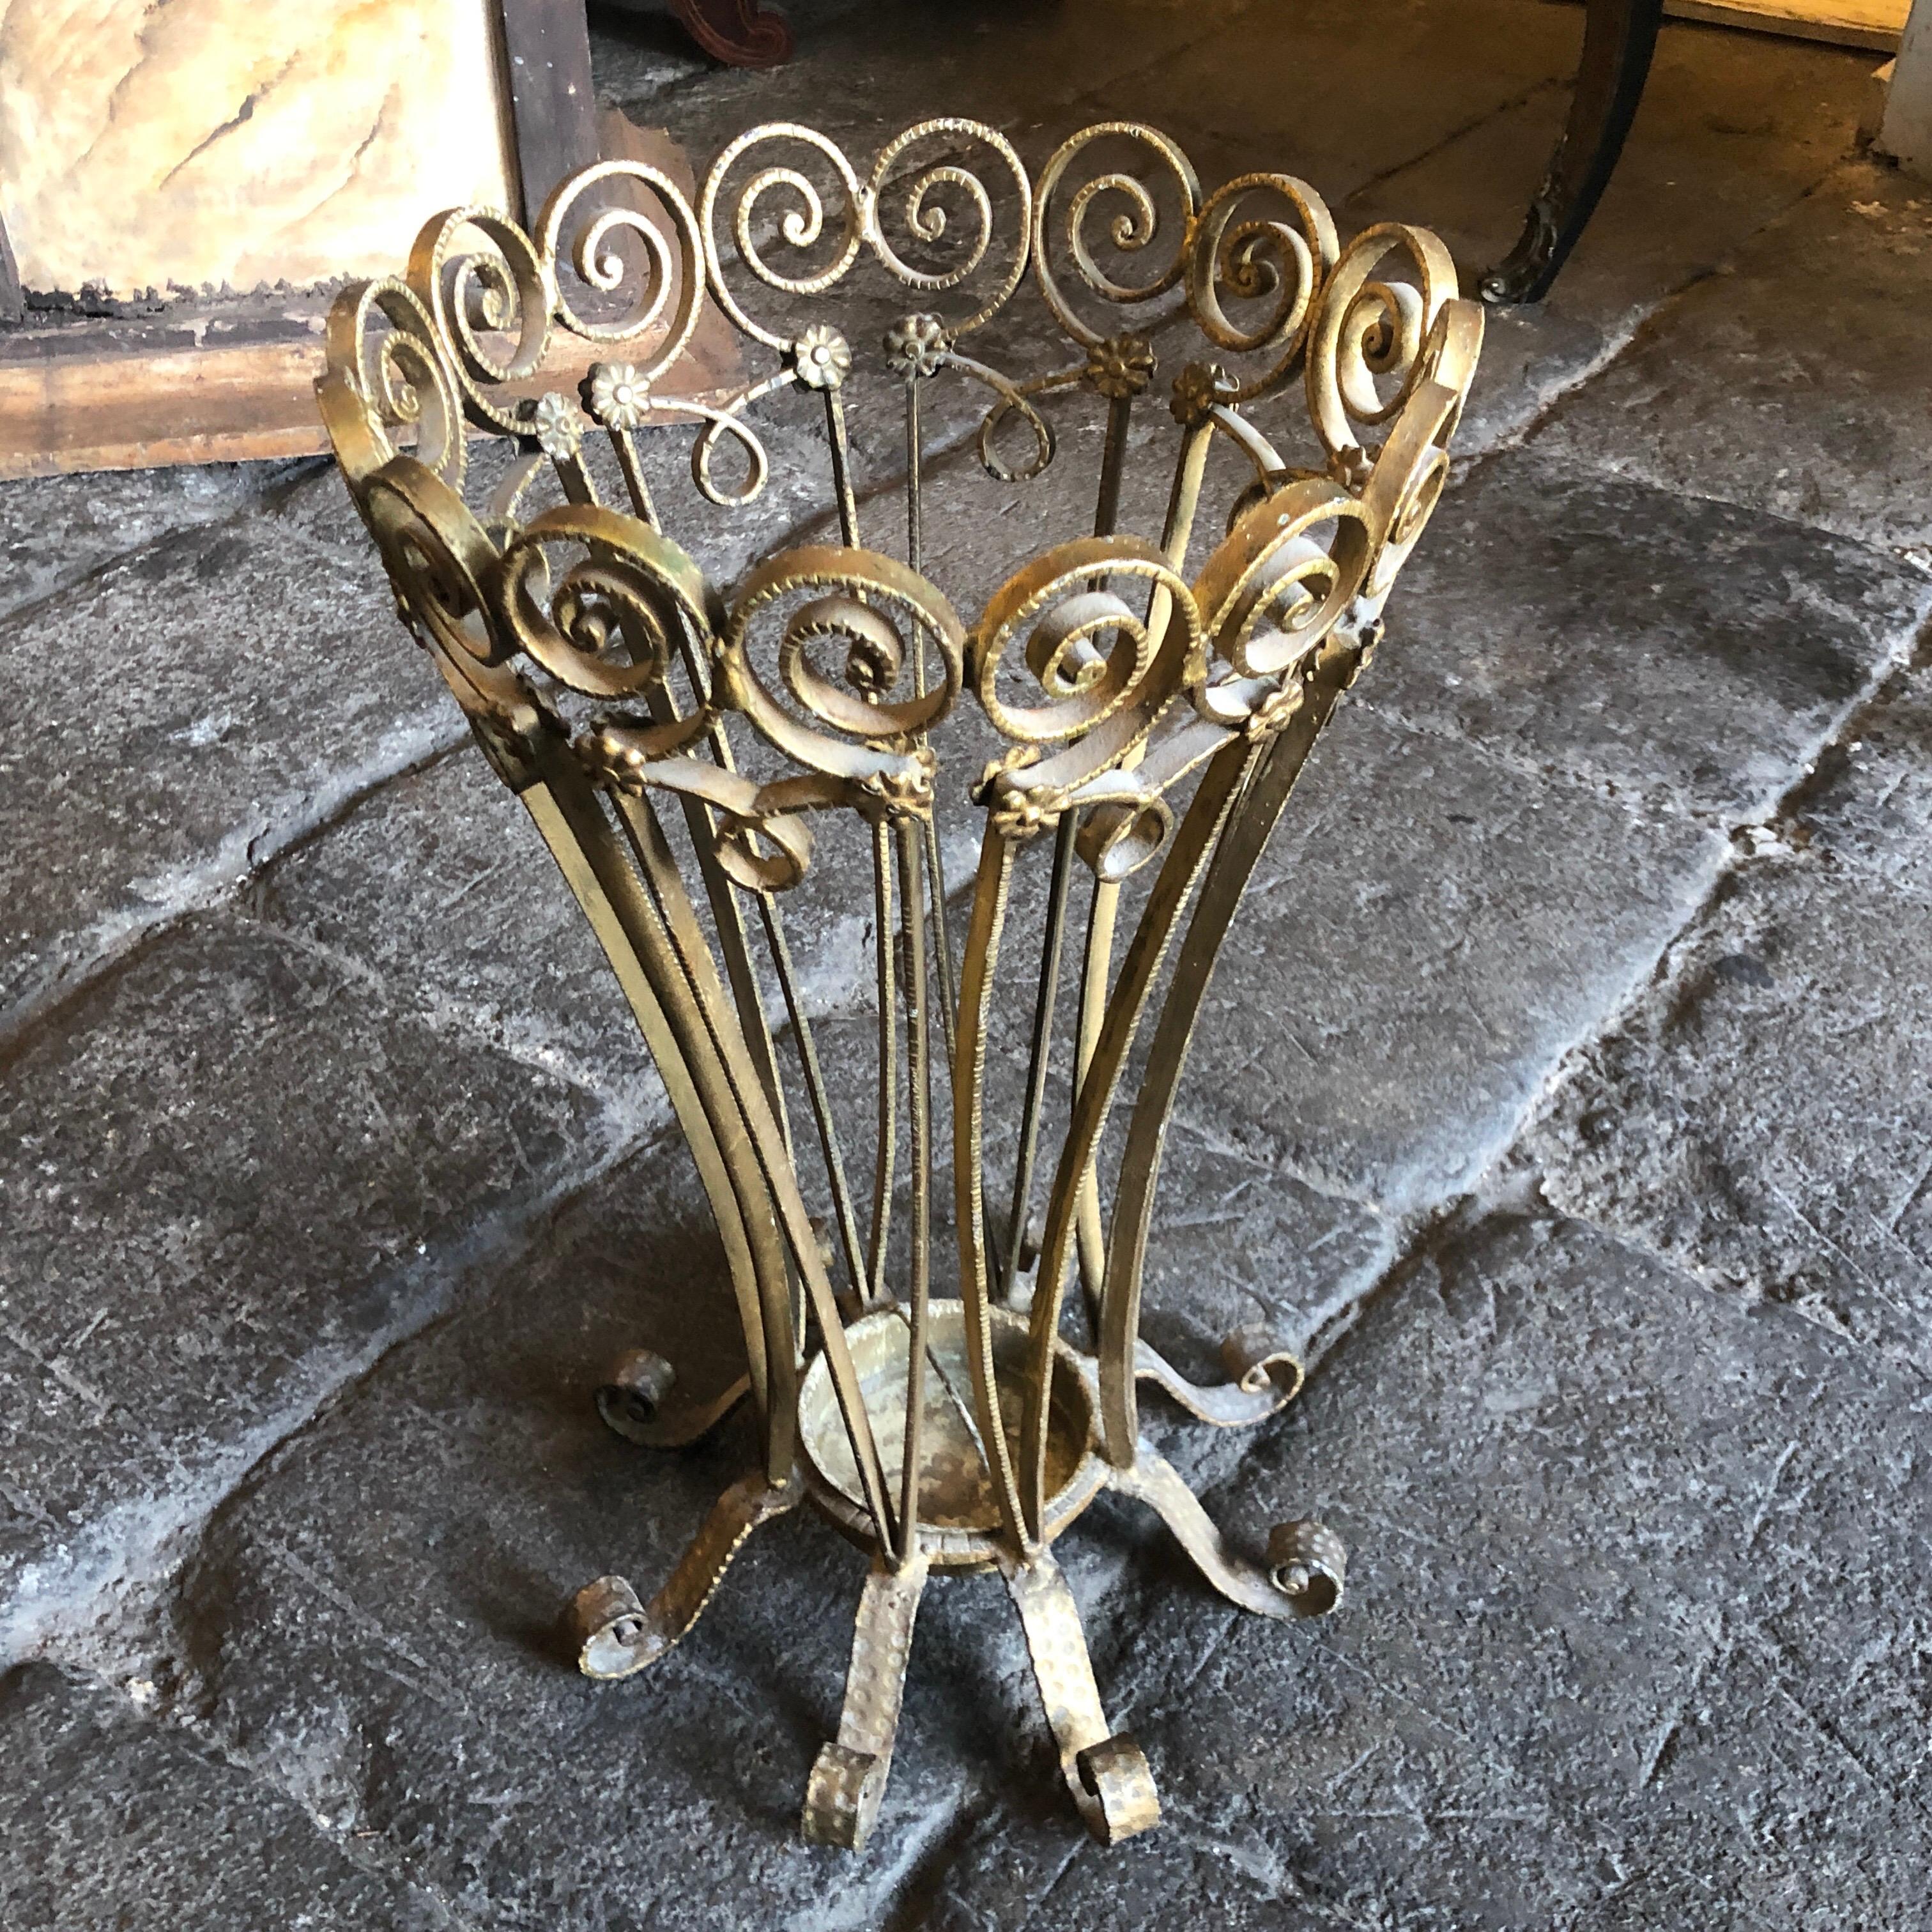 A stylish Italian umbrella stand manufactured in Italy in the 1960s, designed by Pier Luigi Colli, an Italian furniture designer known for his exquisite craftsmanship and innovative designs, and this umbrella stand showcases his talent and the